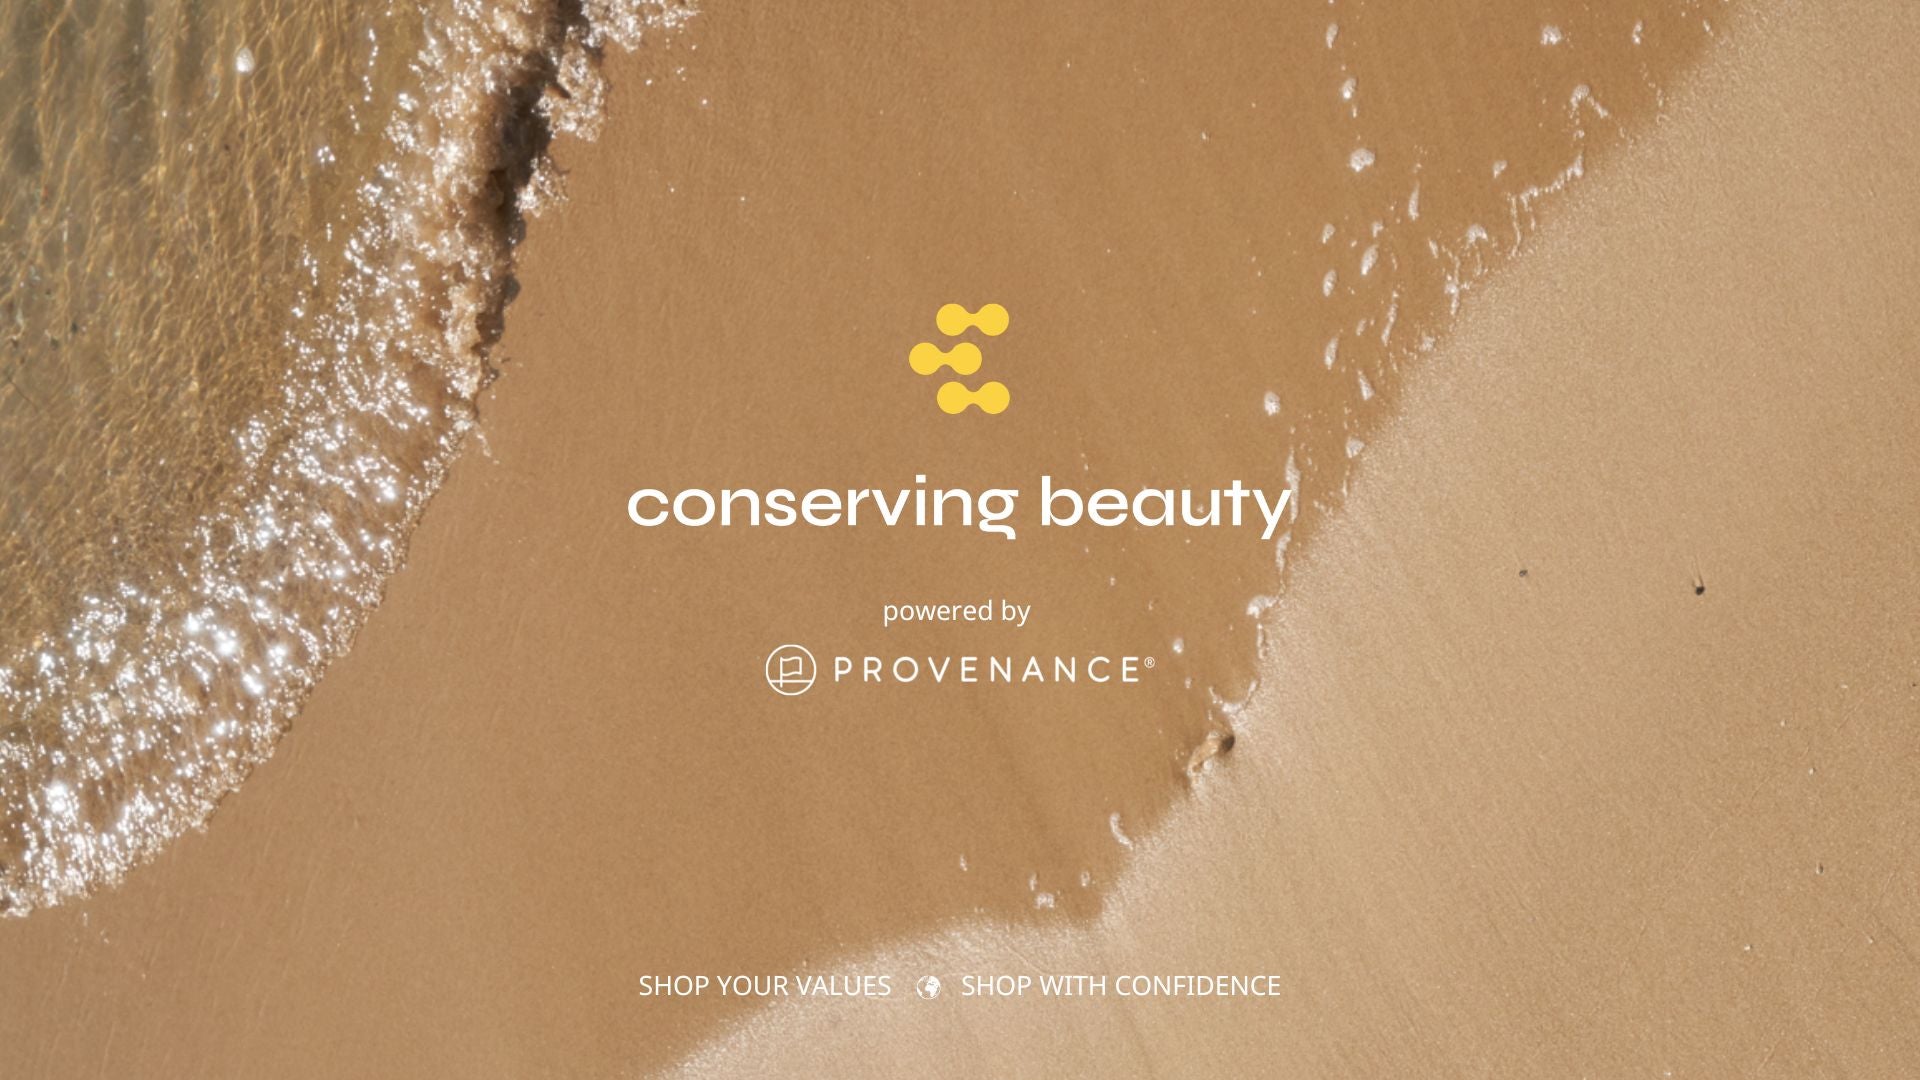 Conserving Beauty. The first Australian beauty brand to be powered by Provenance